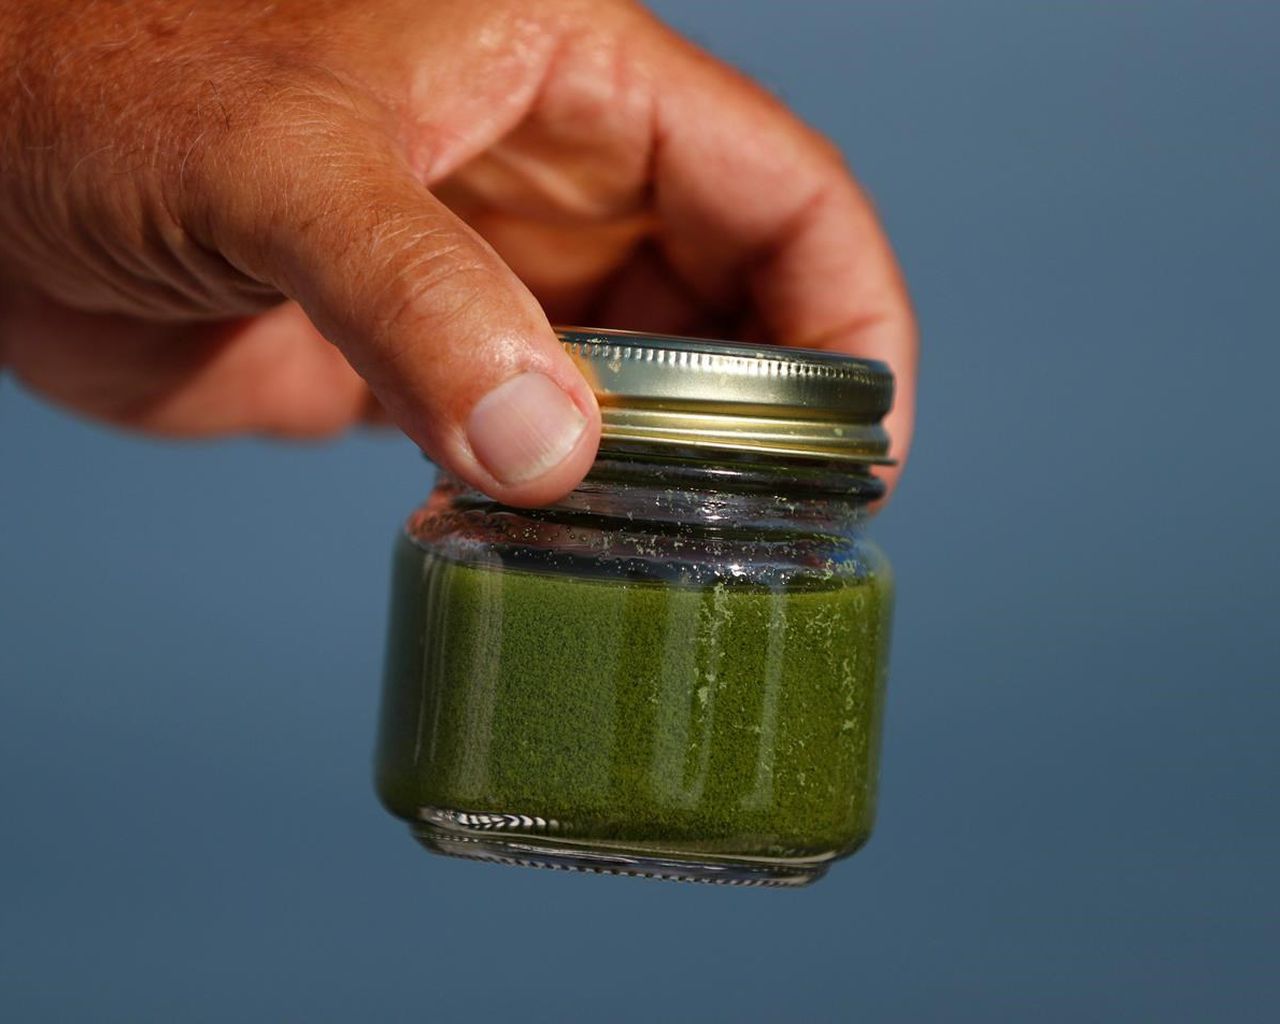 Ohio’s toxic algae plan could give other states a blueprint